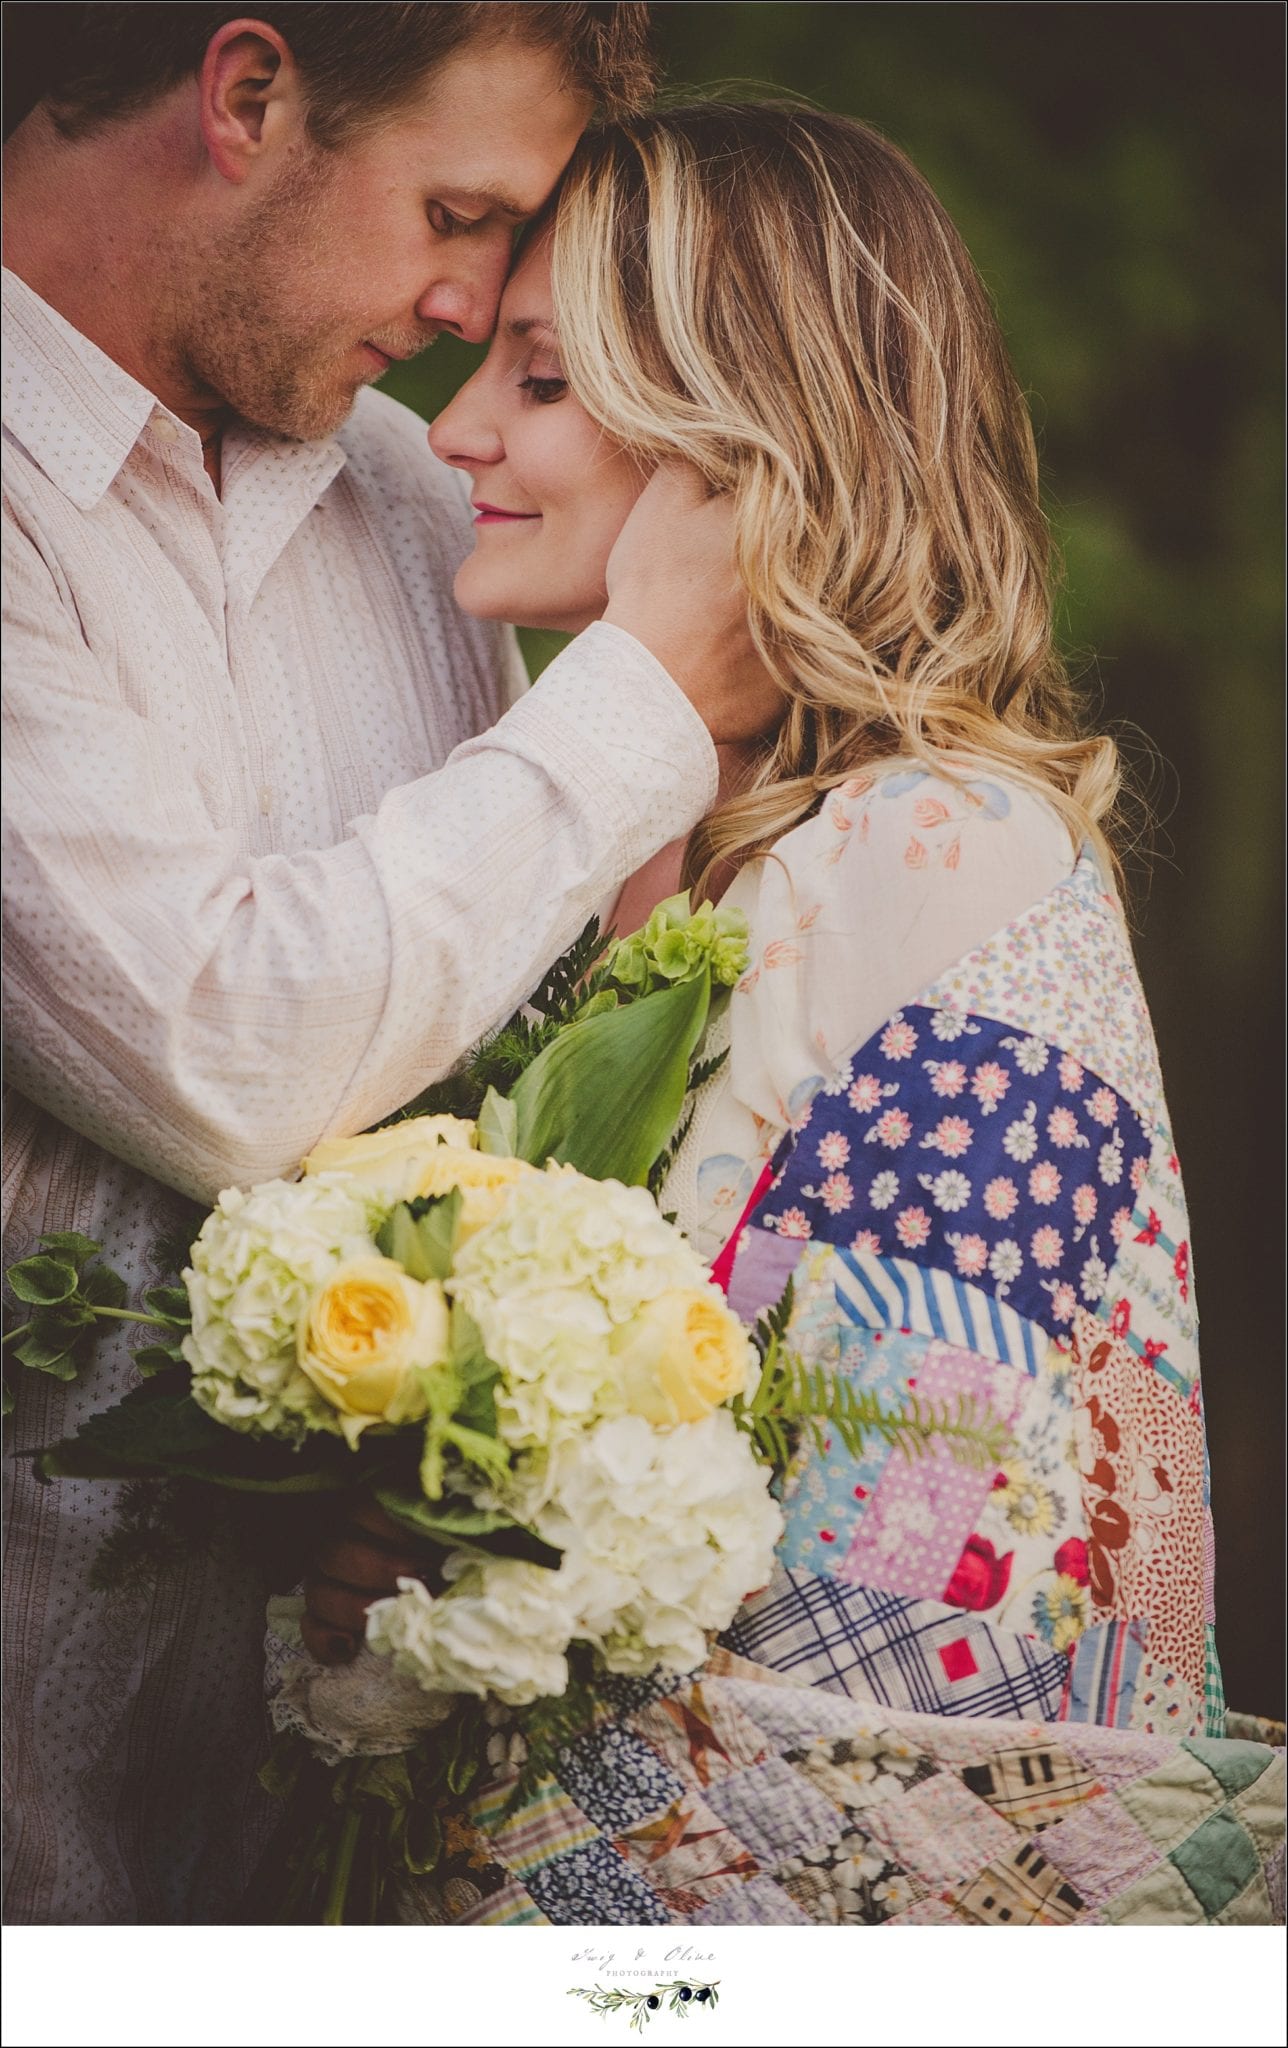 blankets, flowers, bouquet, stylized, go big or go home, love this couple, love life, TOP